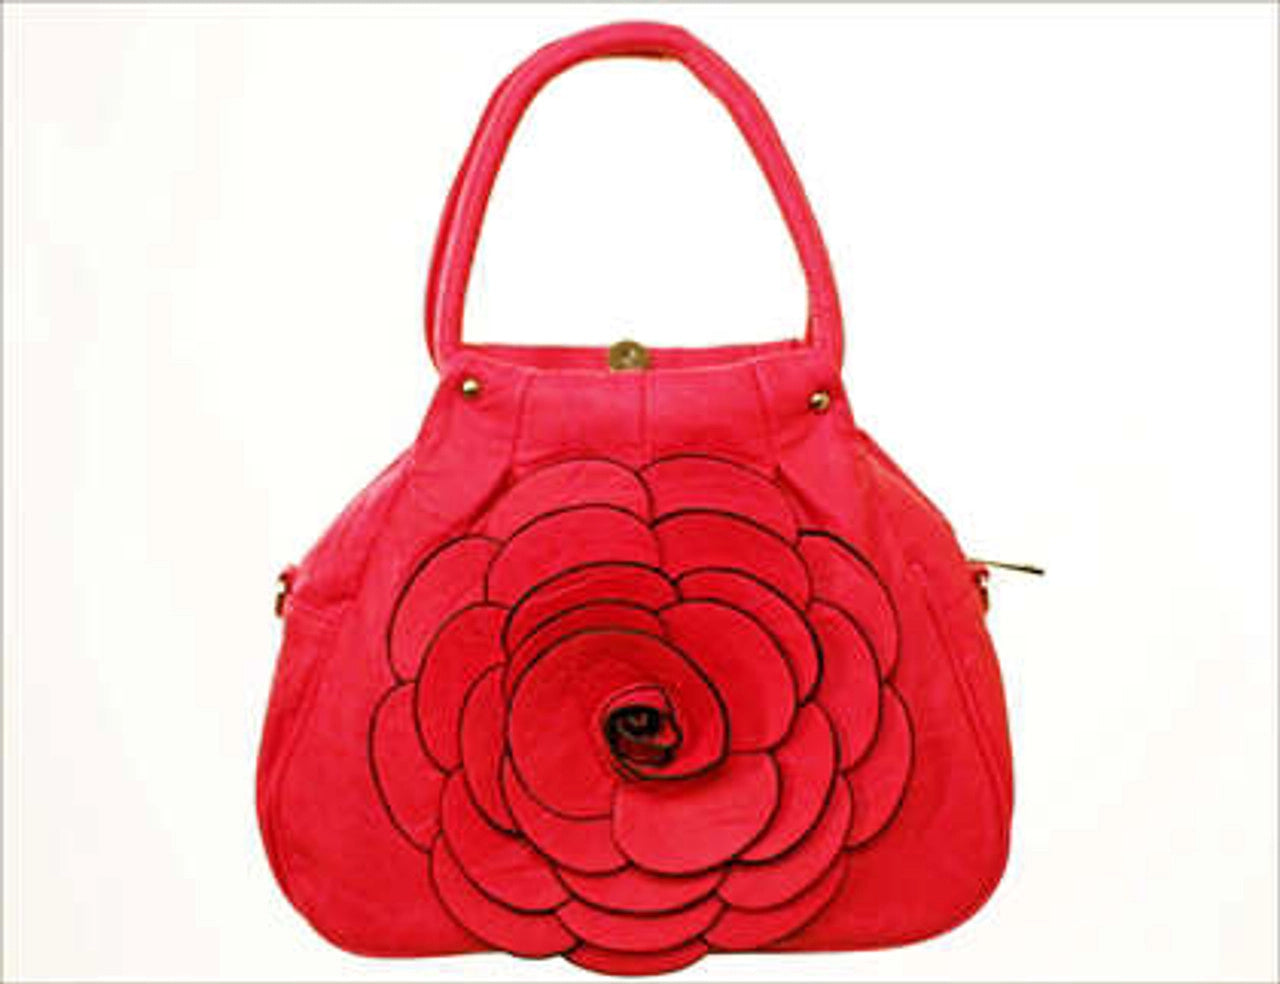 WOMEN'S RED PURSE WITH FLOWER